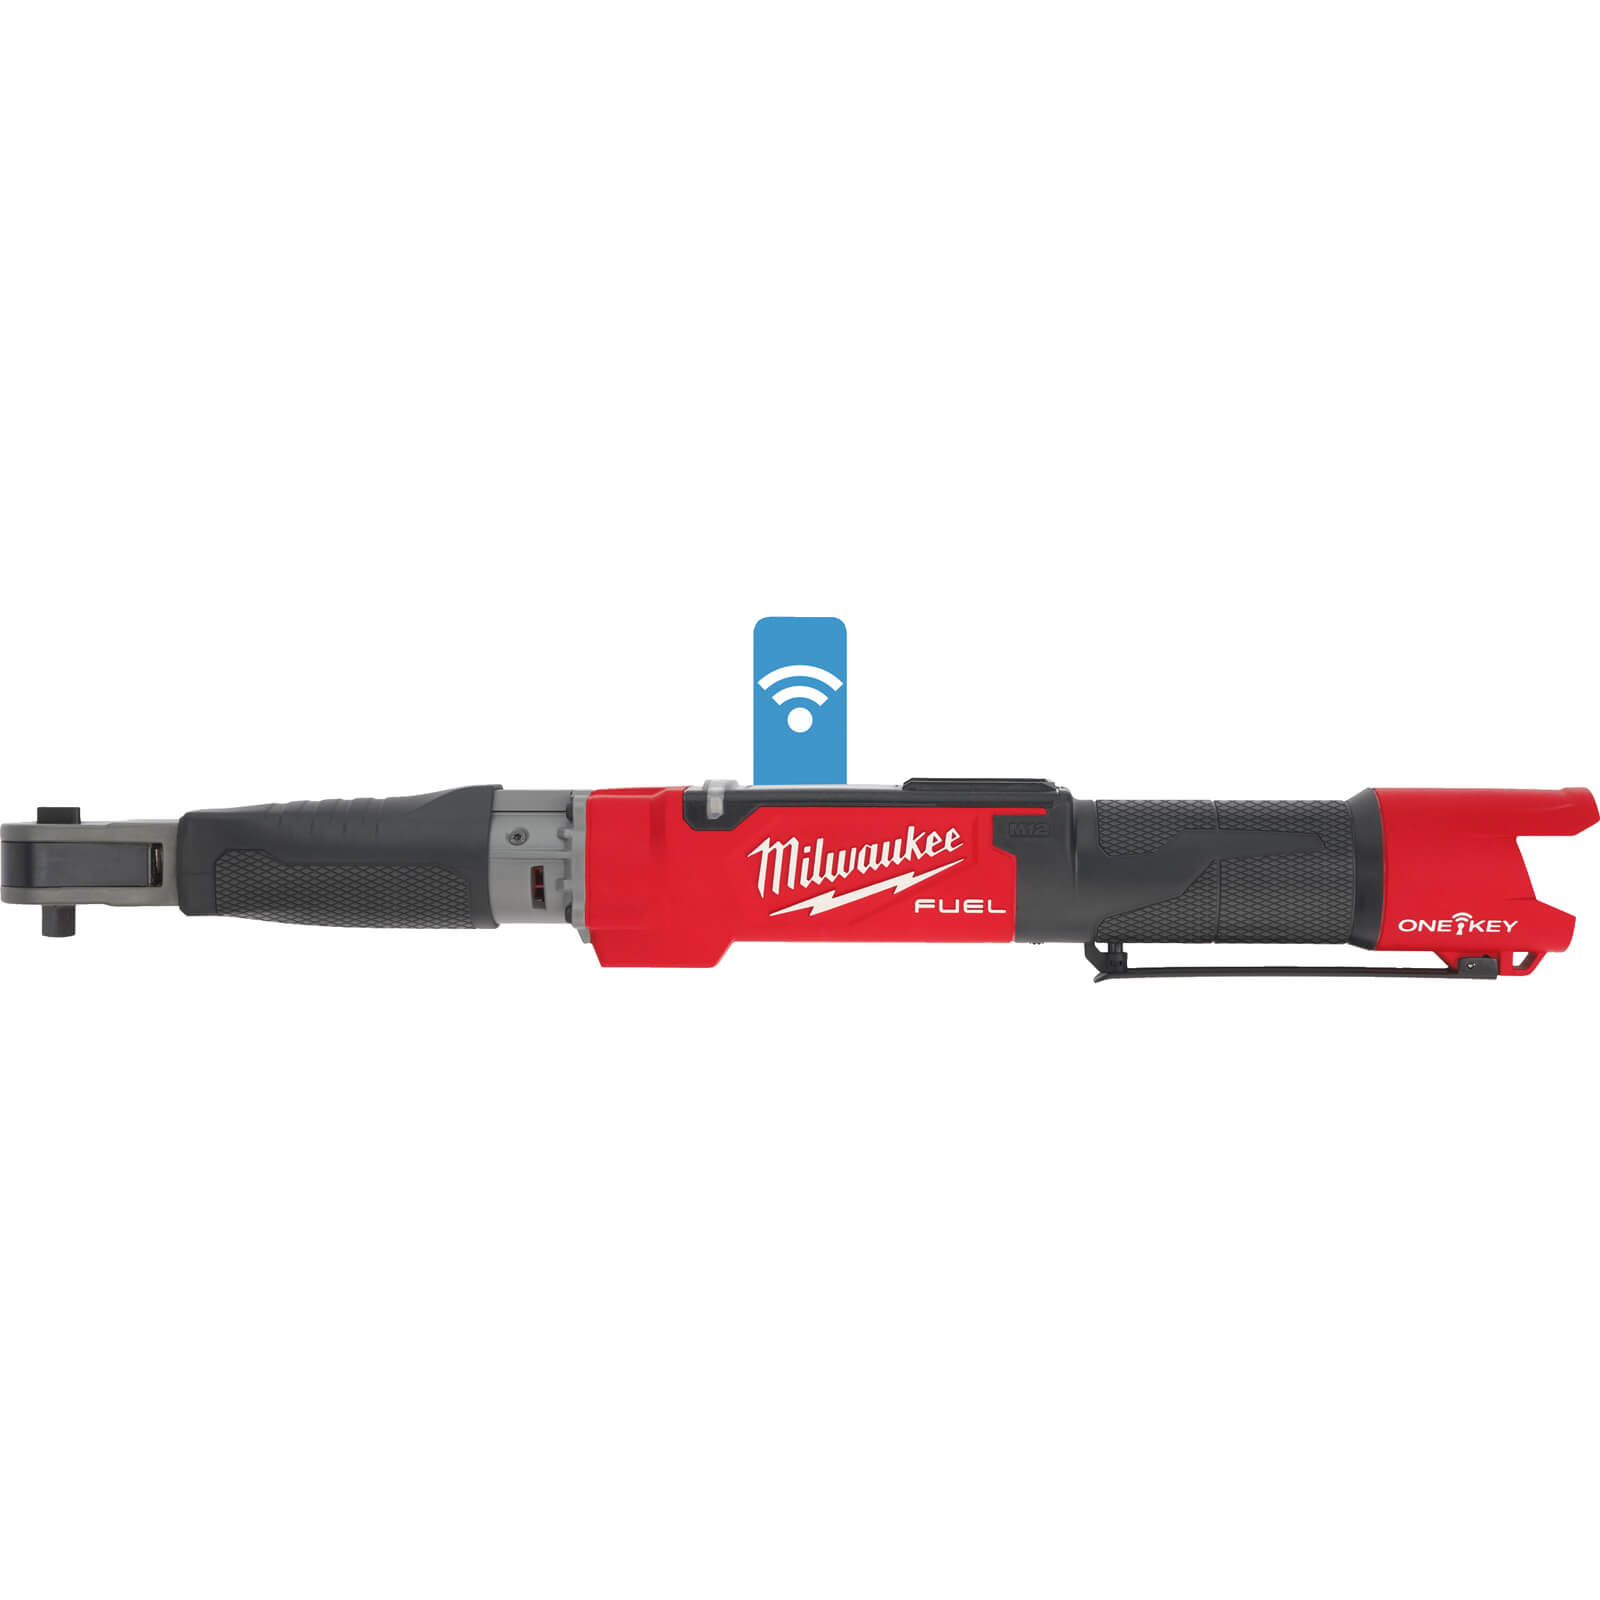 Image of Milwaukee M12 ONEFTR38 Fuel 12v Cordless Brushless 3/8" Drive Digital Torque Wrench No Batteries No Charger Case